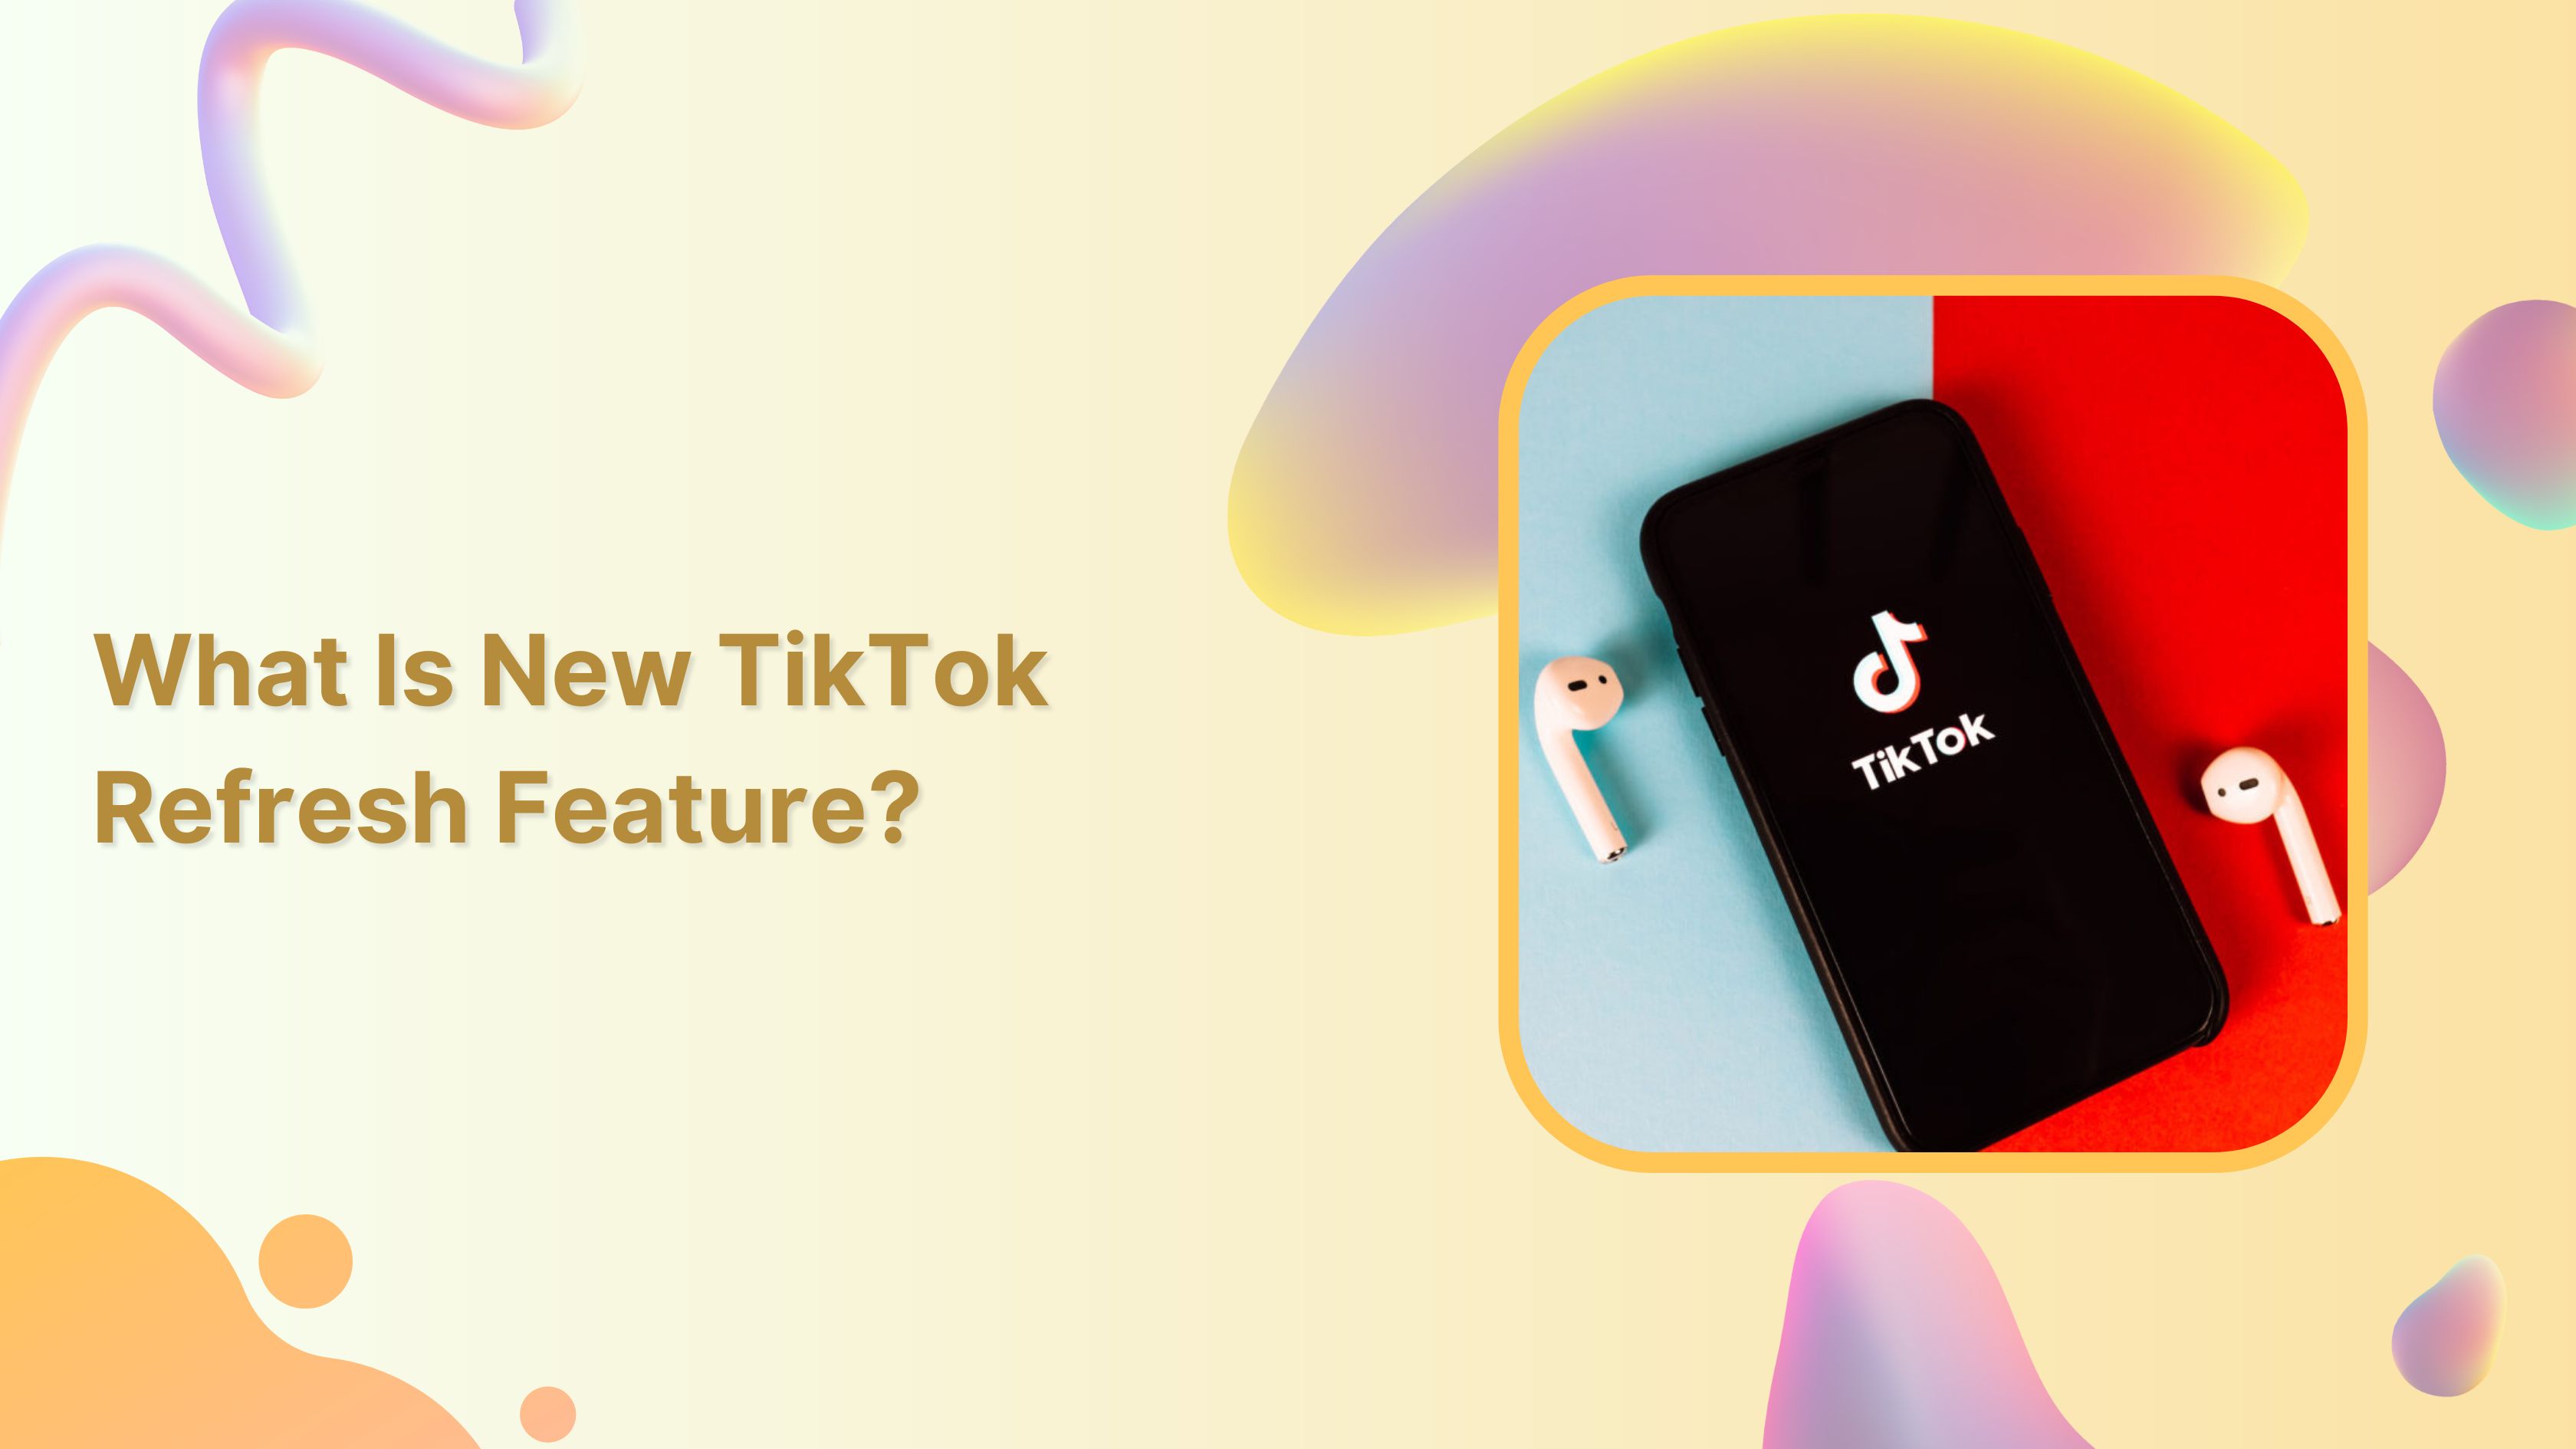 What is new tiktok refresh feature